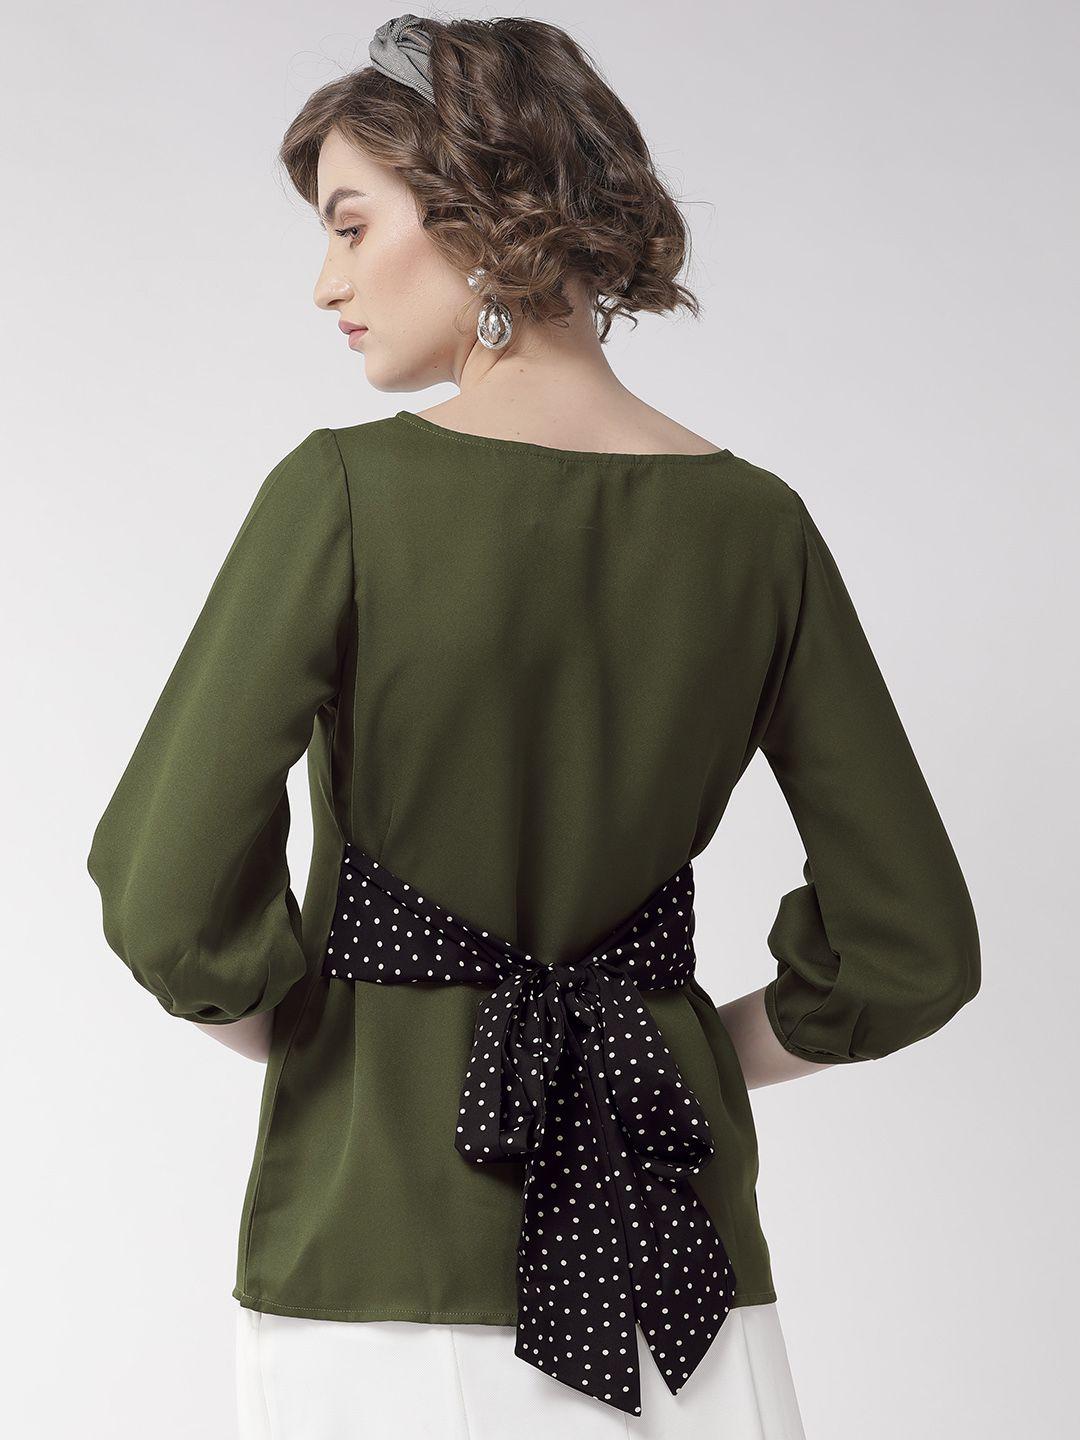 style-quotient-women-olive-green-solid-top